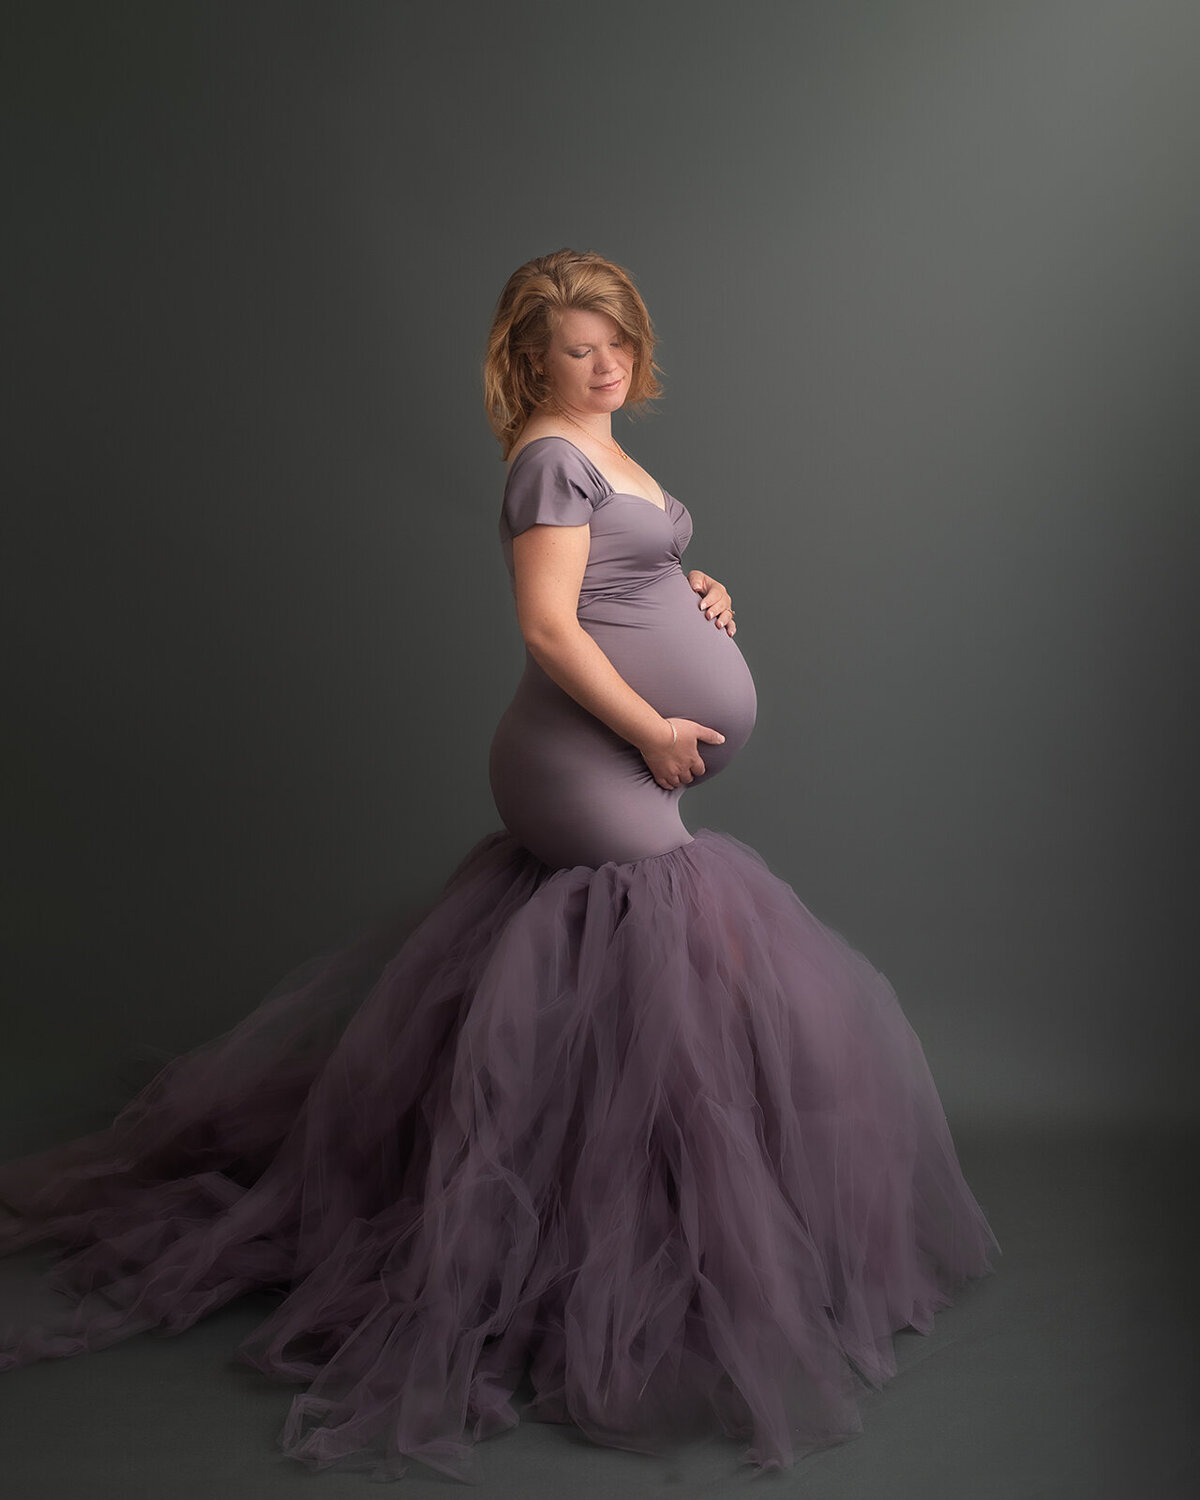 mom expecting a baby in purple gown at maternity photo session